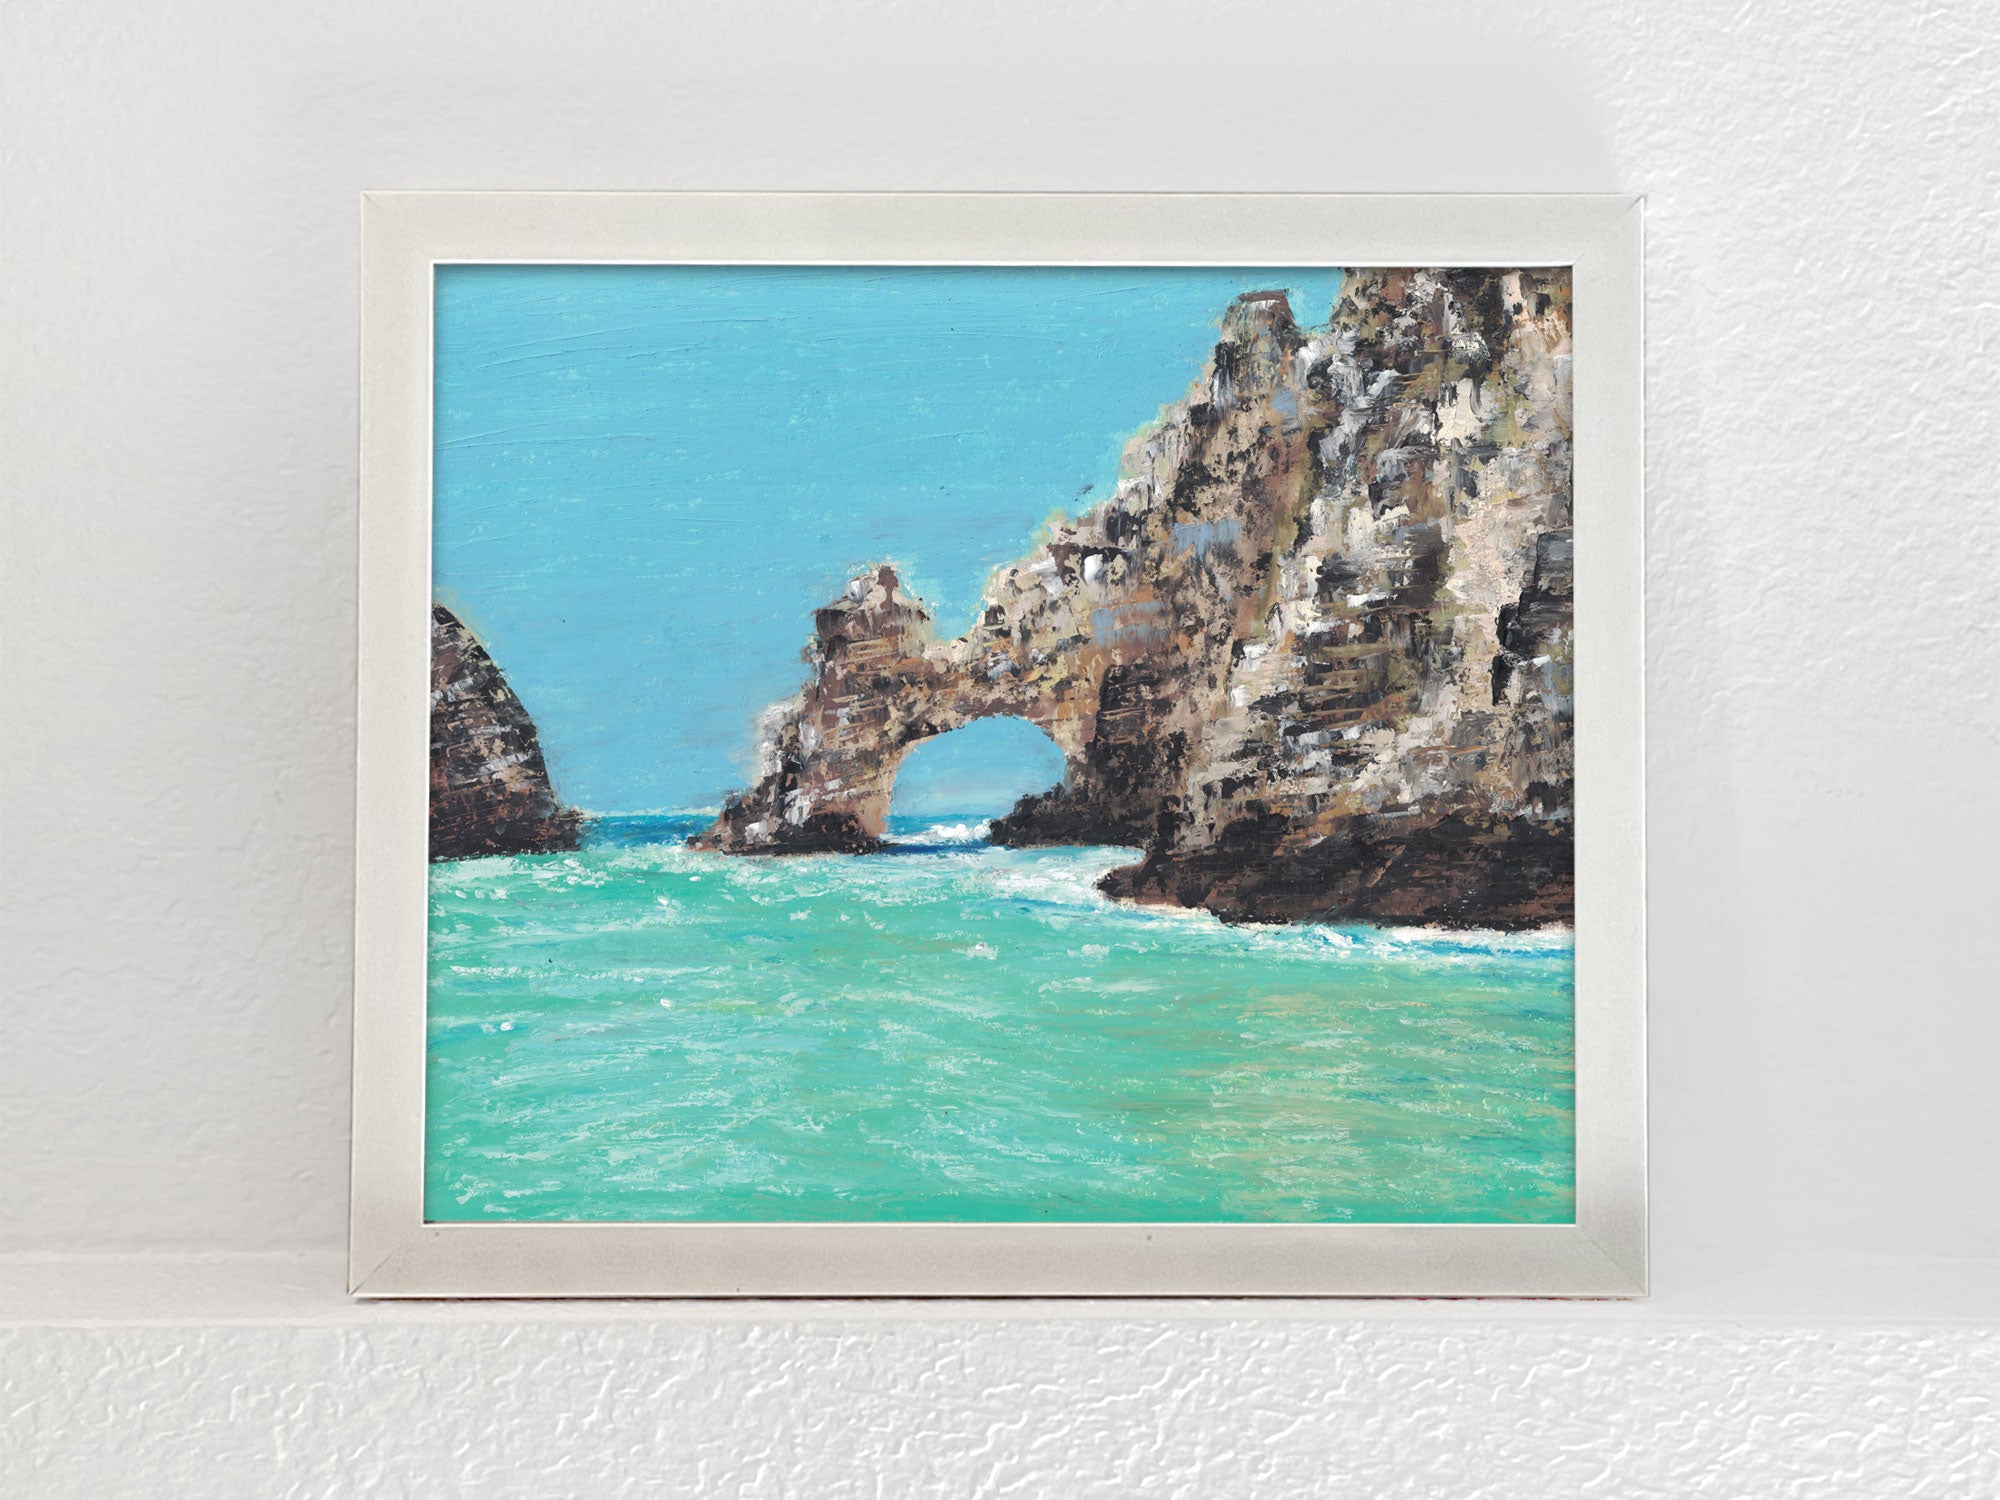 Cliff Rock Ocean Scenery Oil Painting Digital Download | Travel Series - Cabo, Mexico